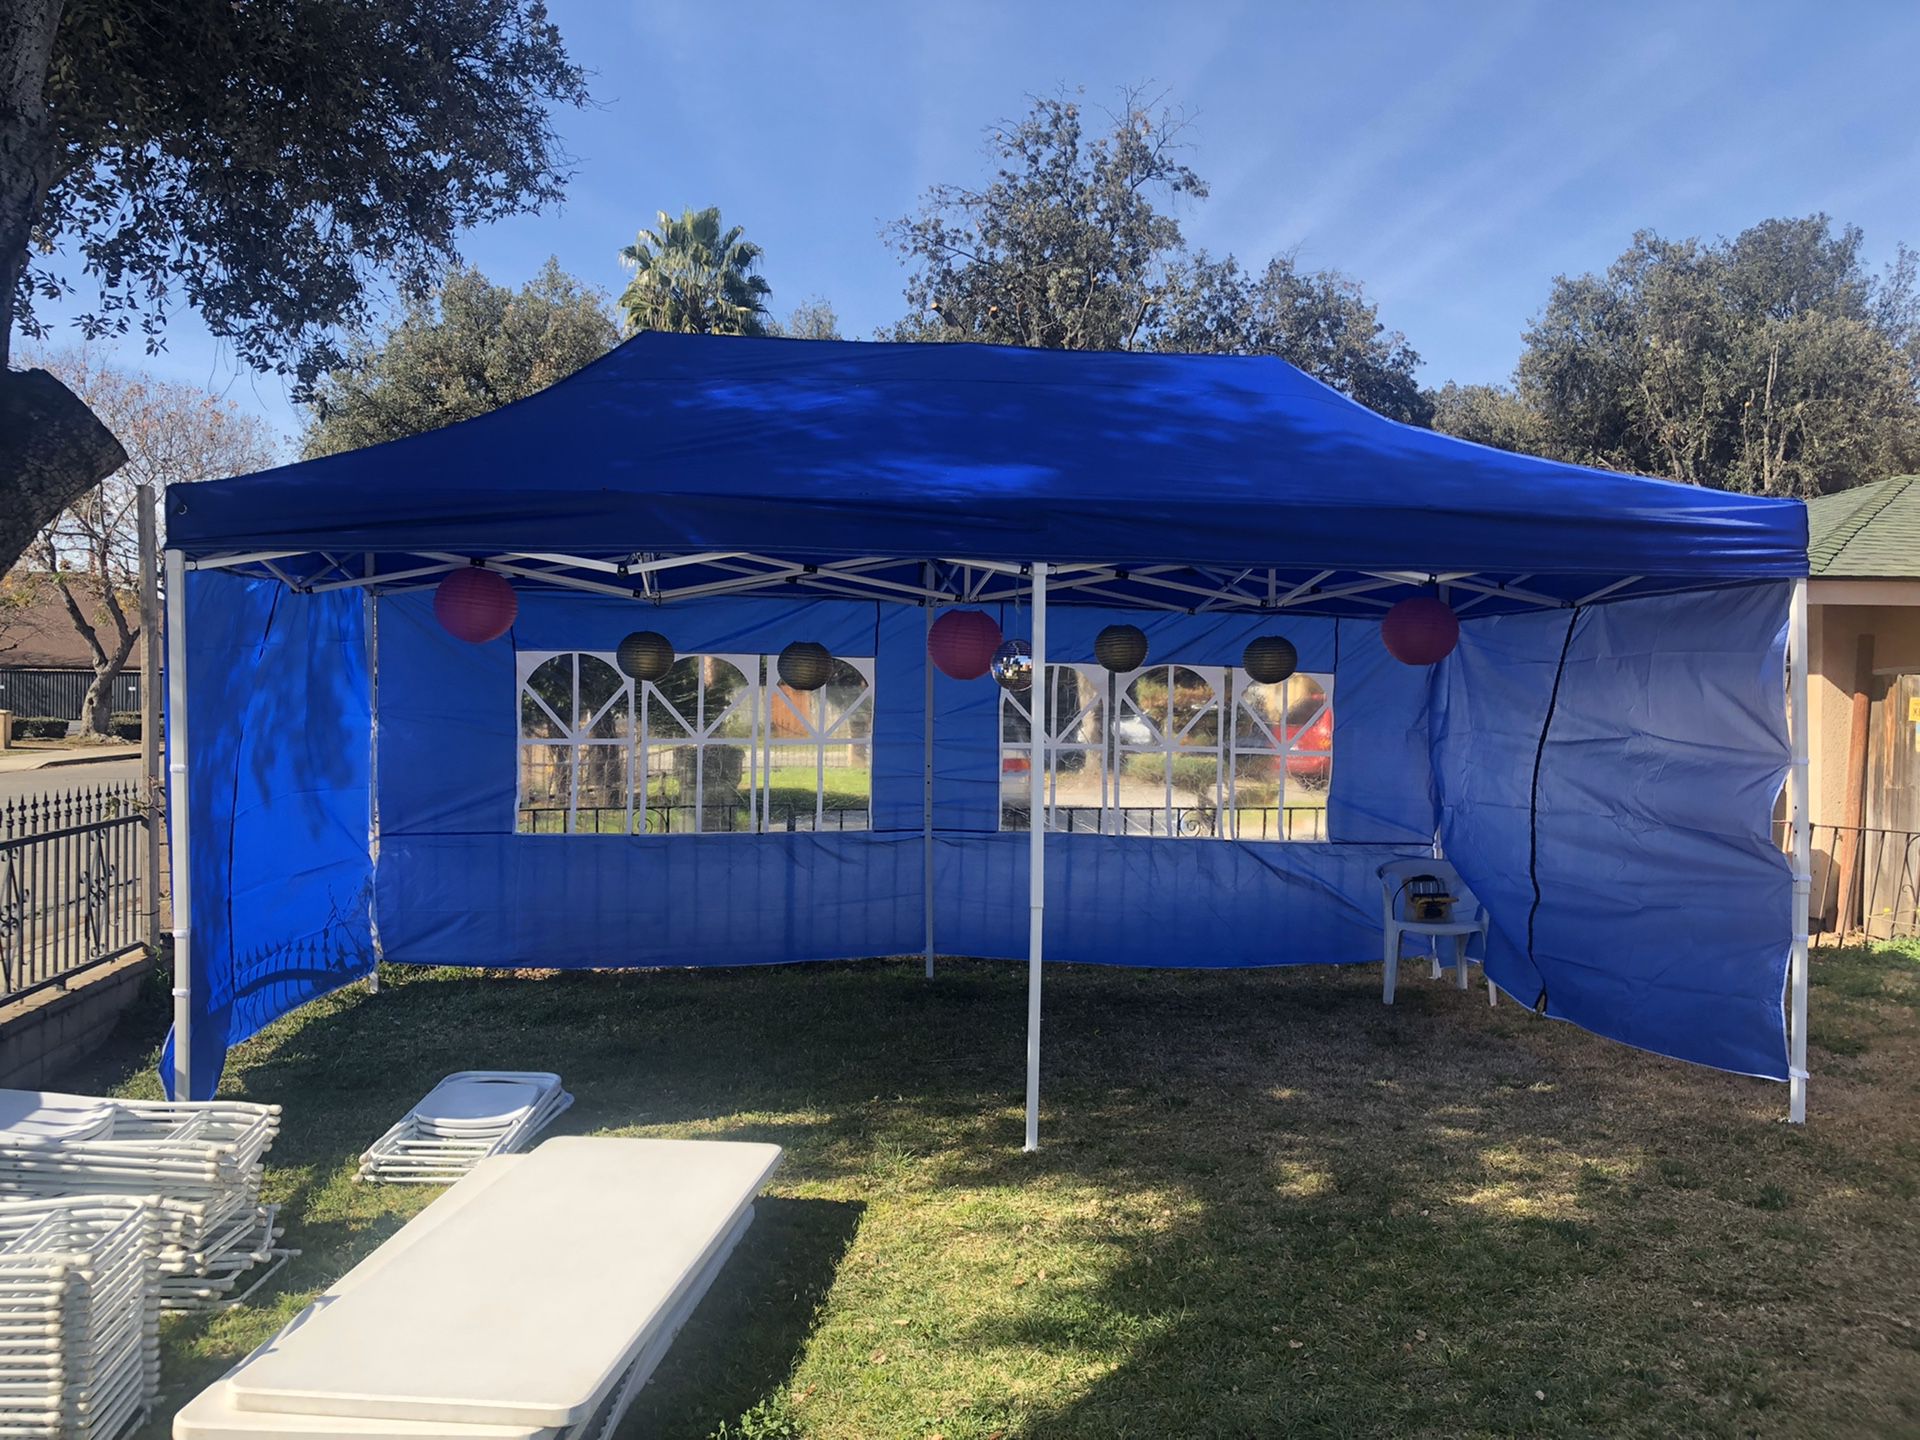 🎉FOR SALE Heavy Duty 10x20ft Pop Up Canopy Tent with Side Walls🎉